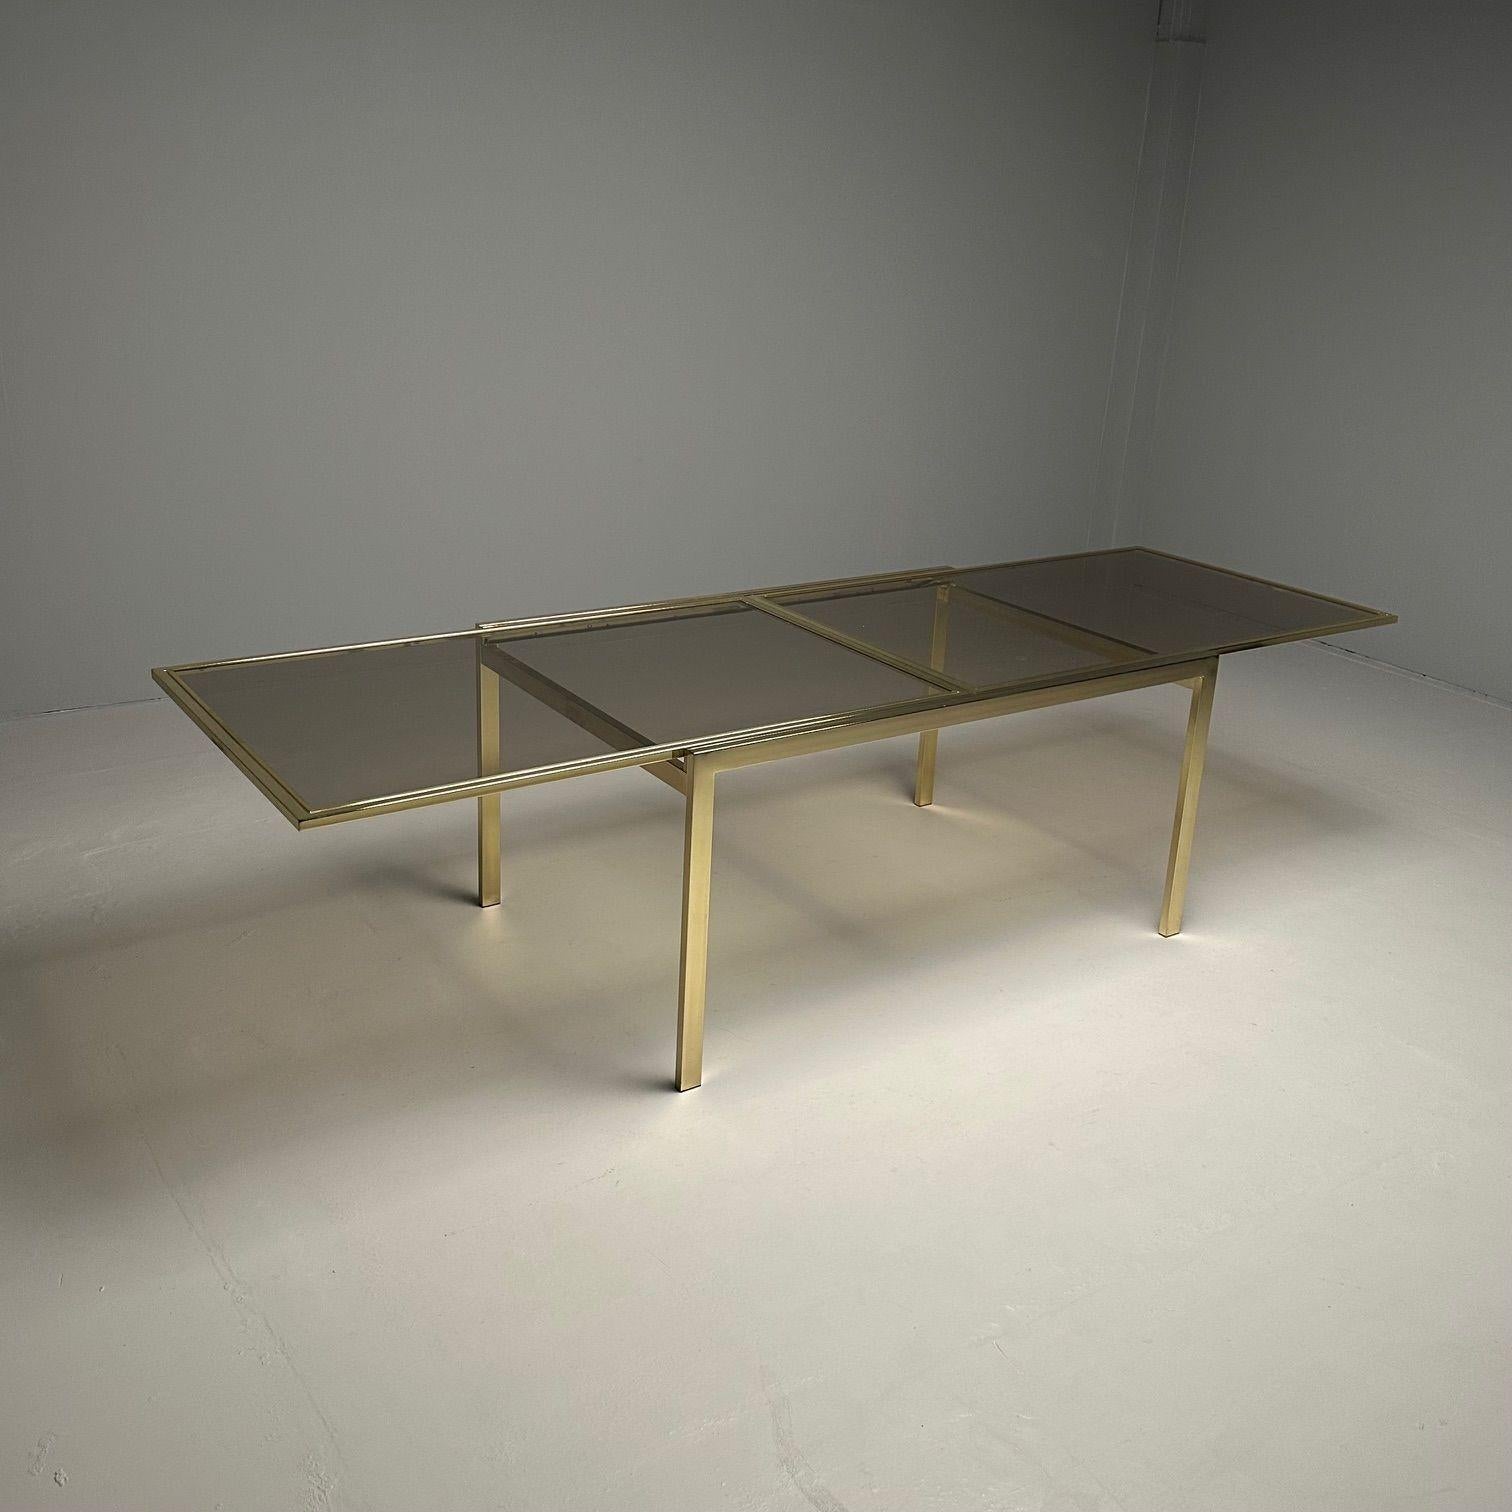 Milo Baughman, DIA, Mid-Century Modern Dining Table, Smoked Glass, Brass, Canada For Sale 6